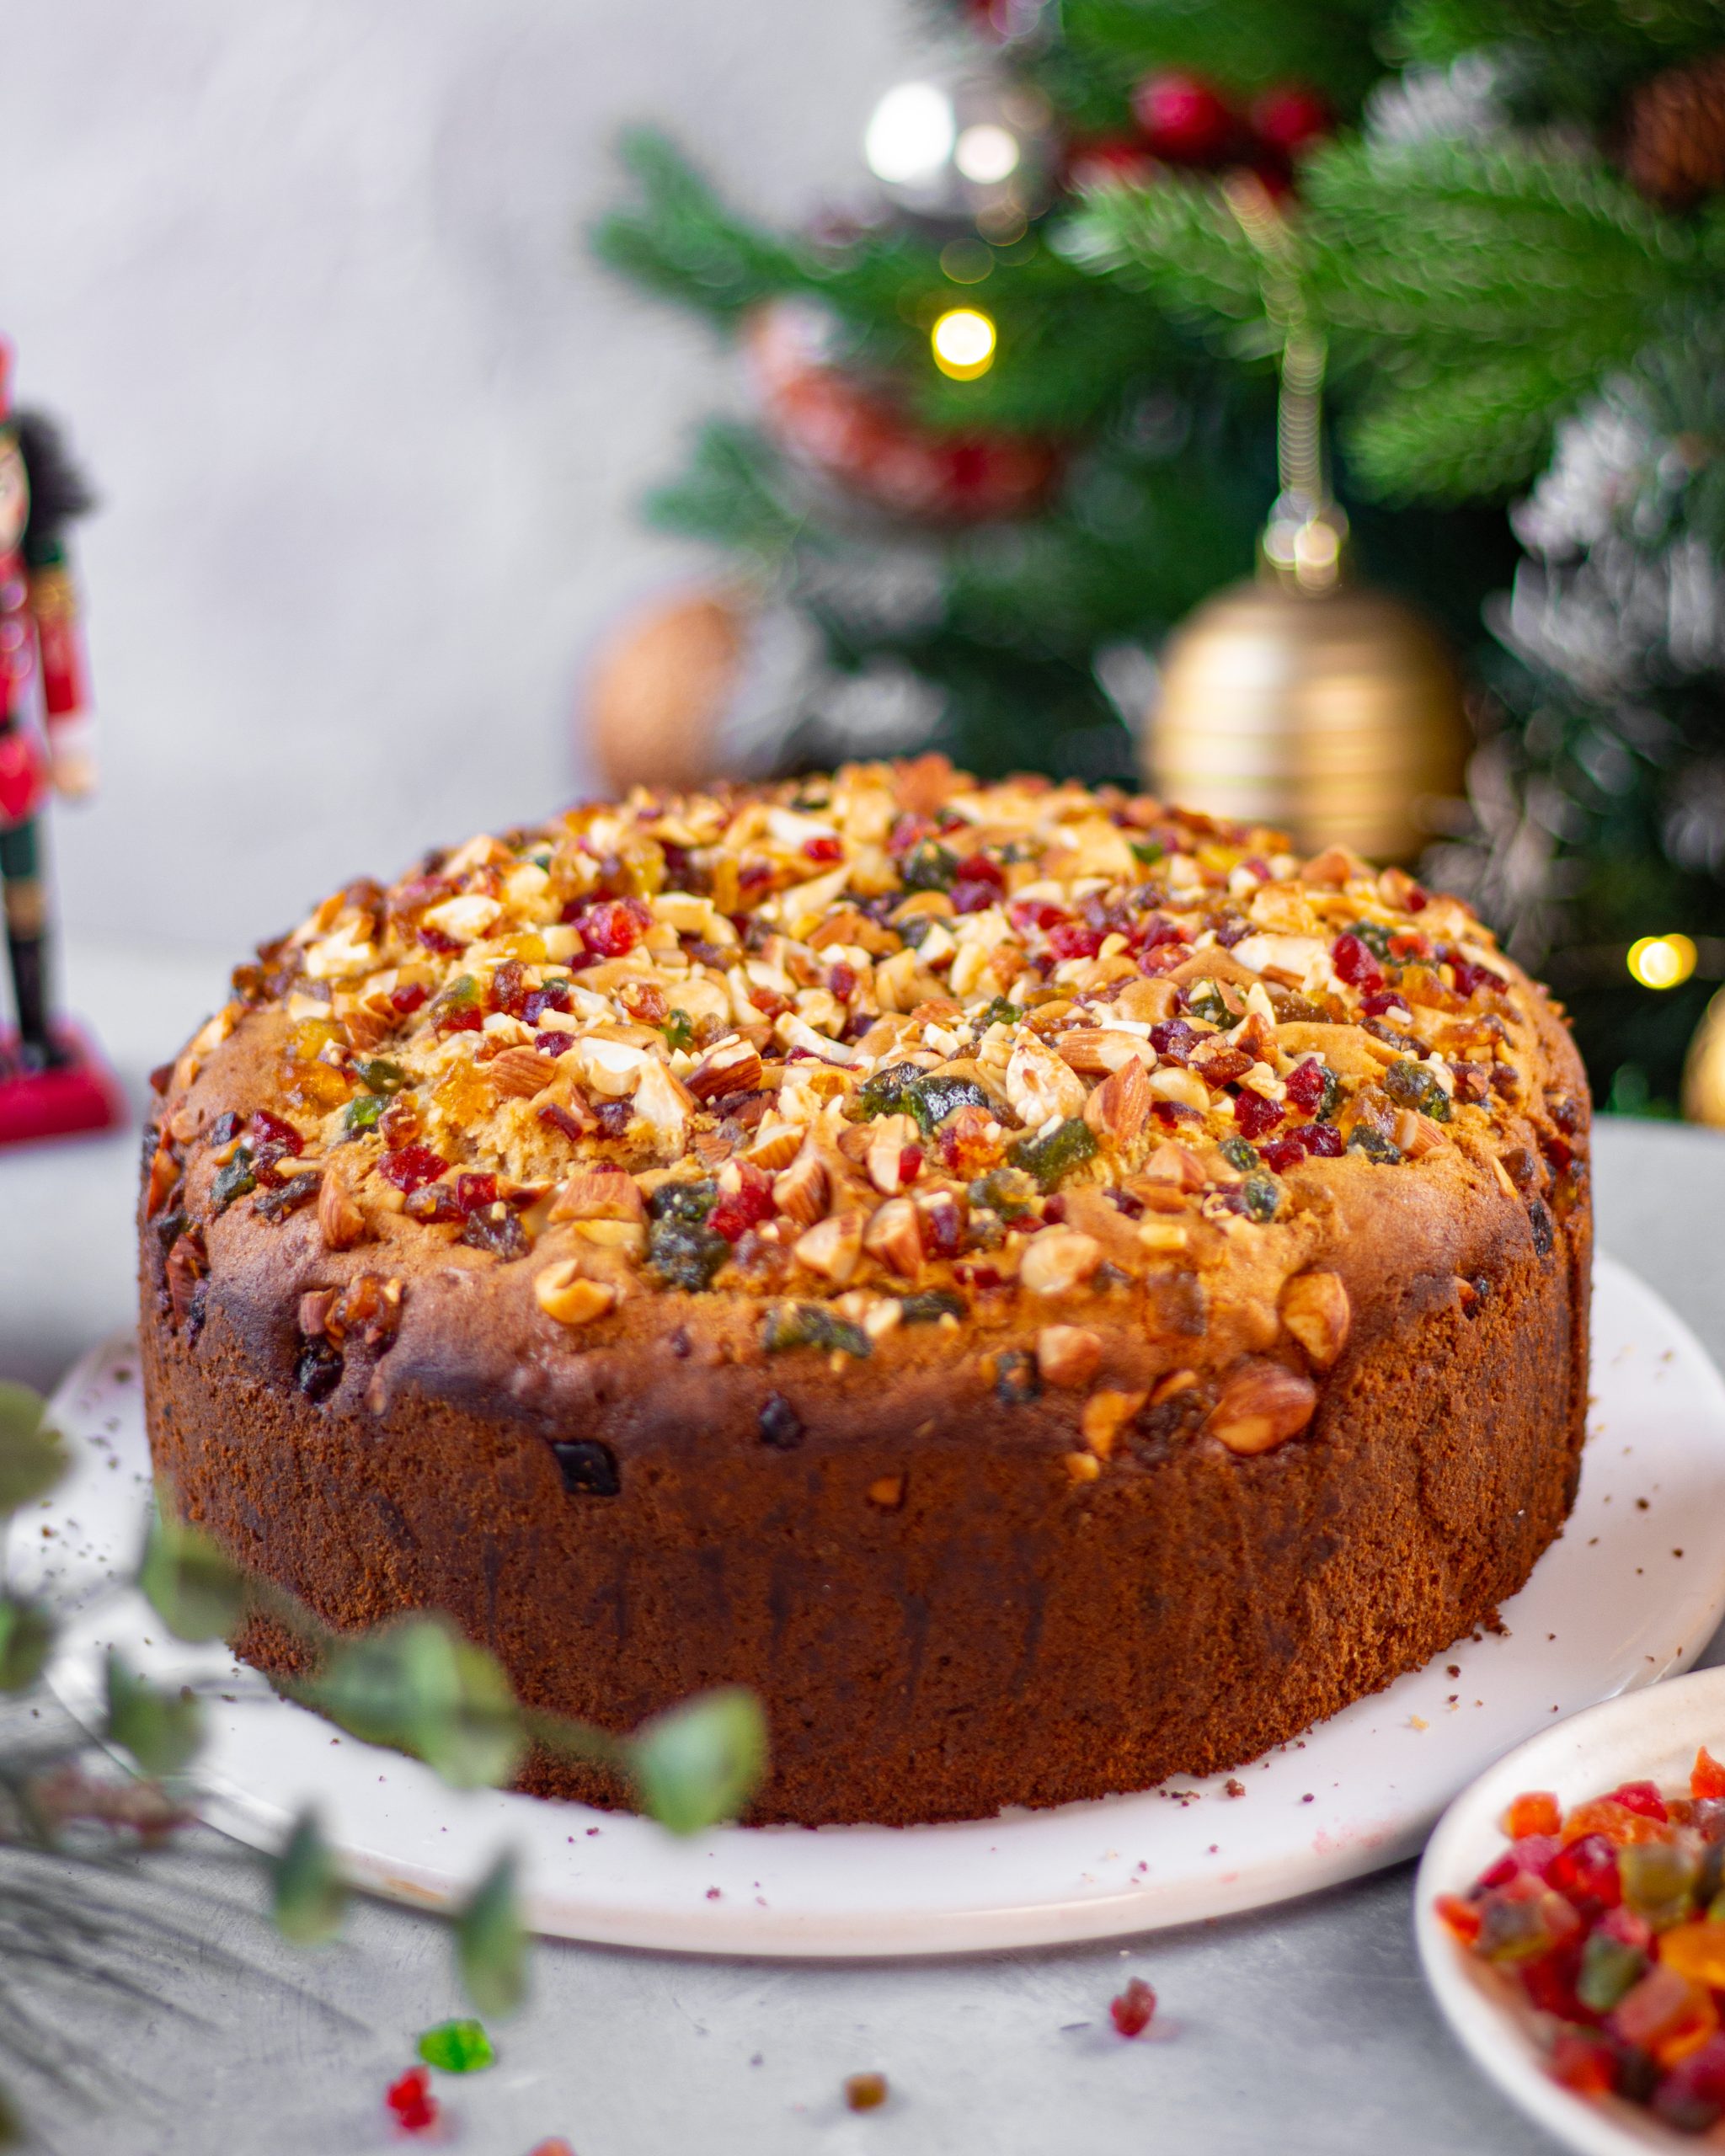 Rich rum plum cake with MARZIPAN AND WHITE ICING | Doh Raising Inc.